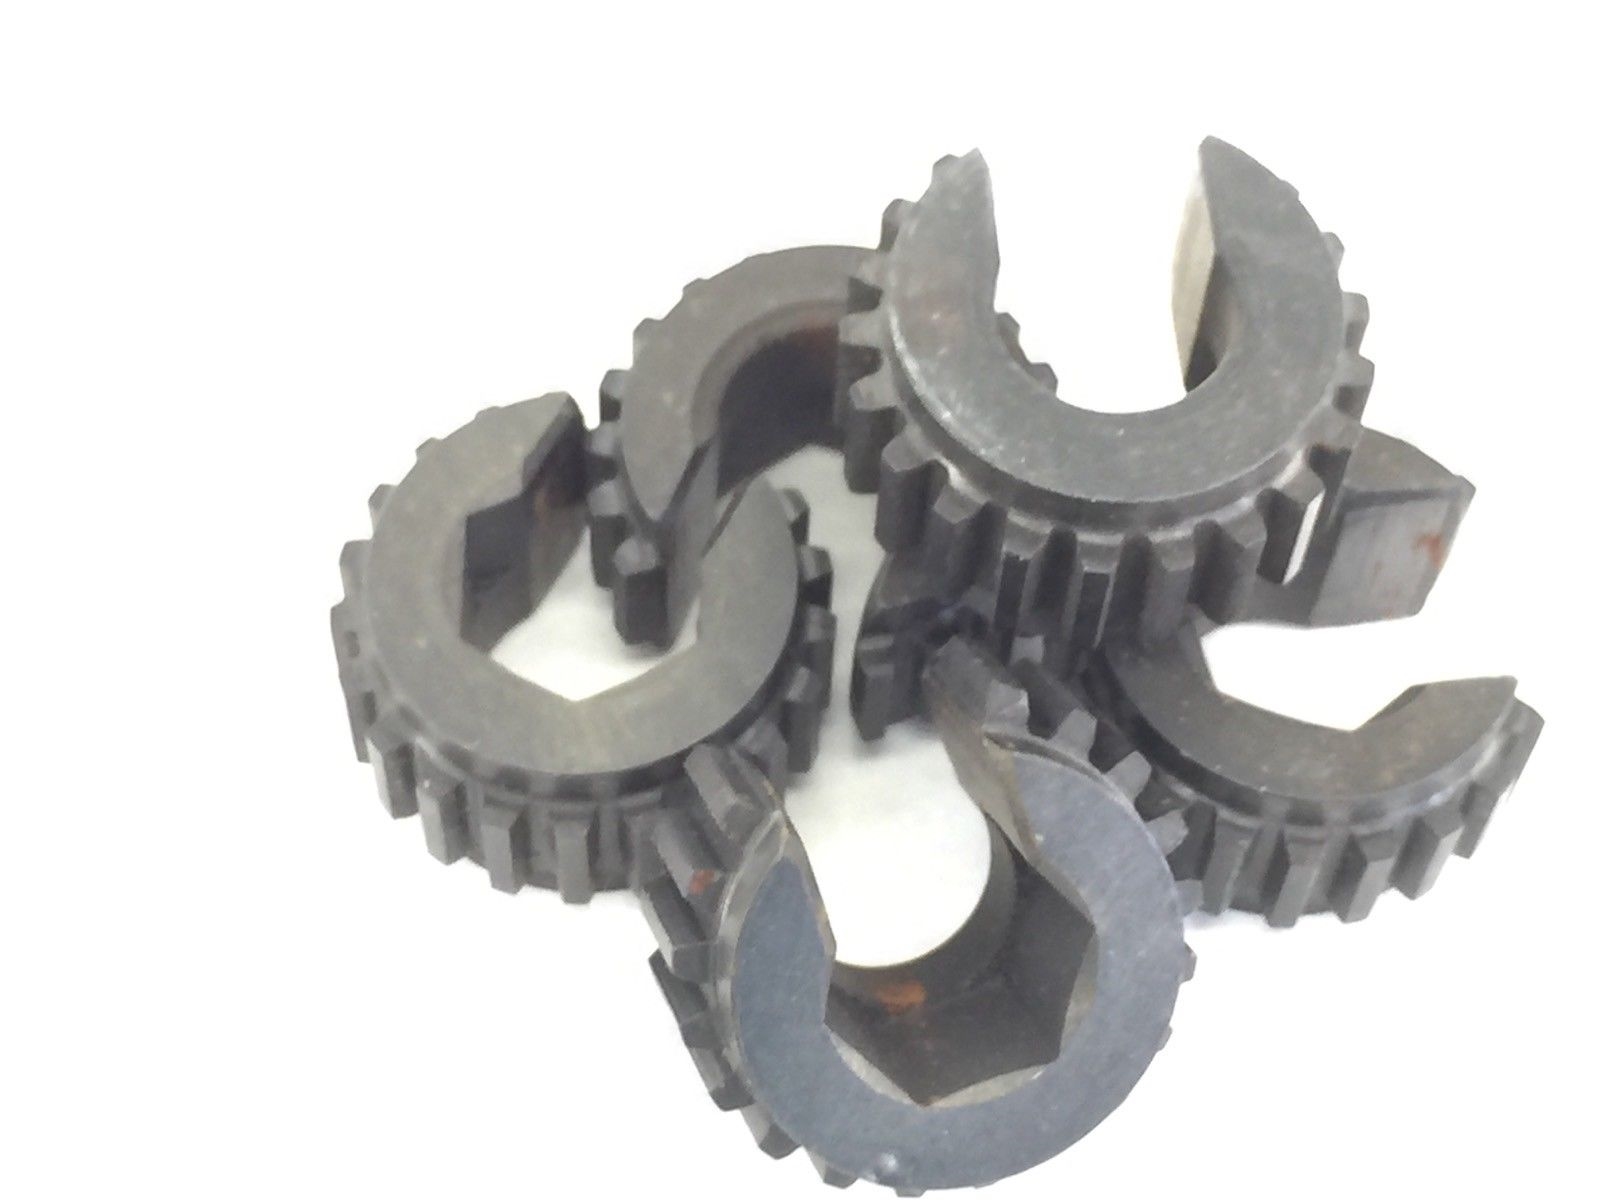 NEW! C SHAPED GEARs 20C 18T 12mm BORE 30mm O.D